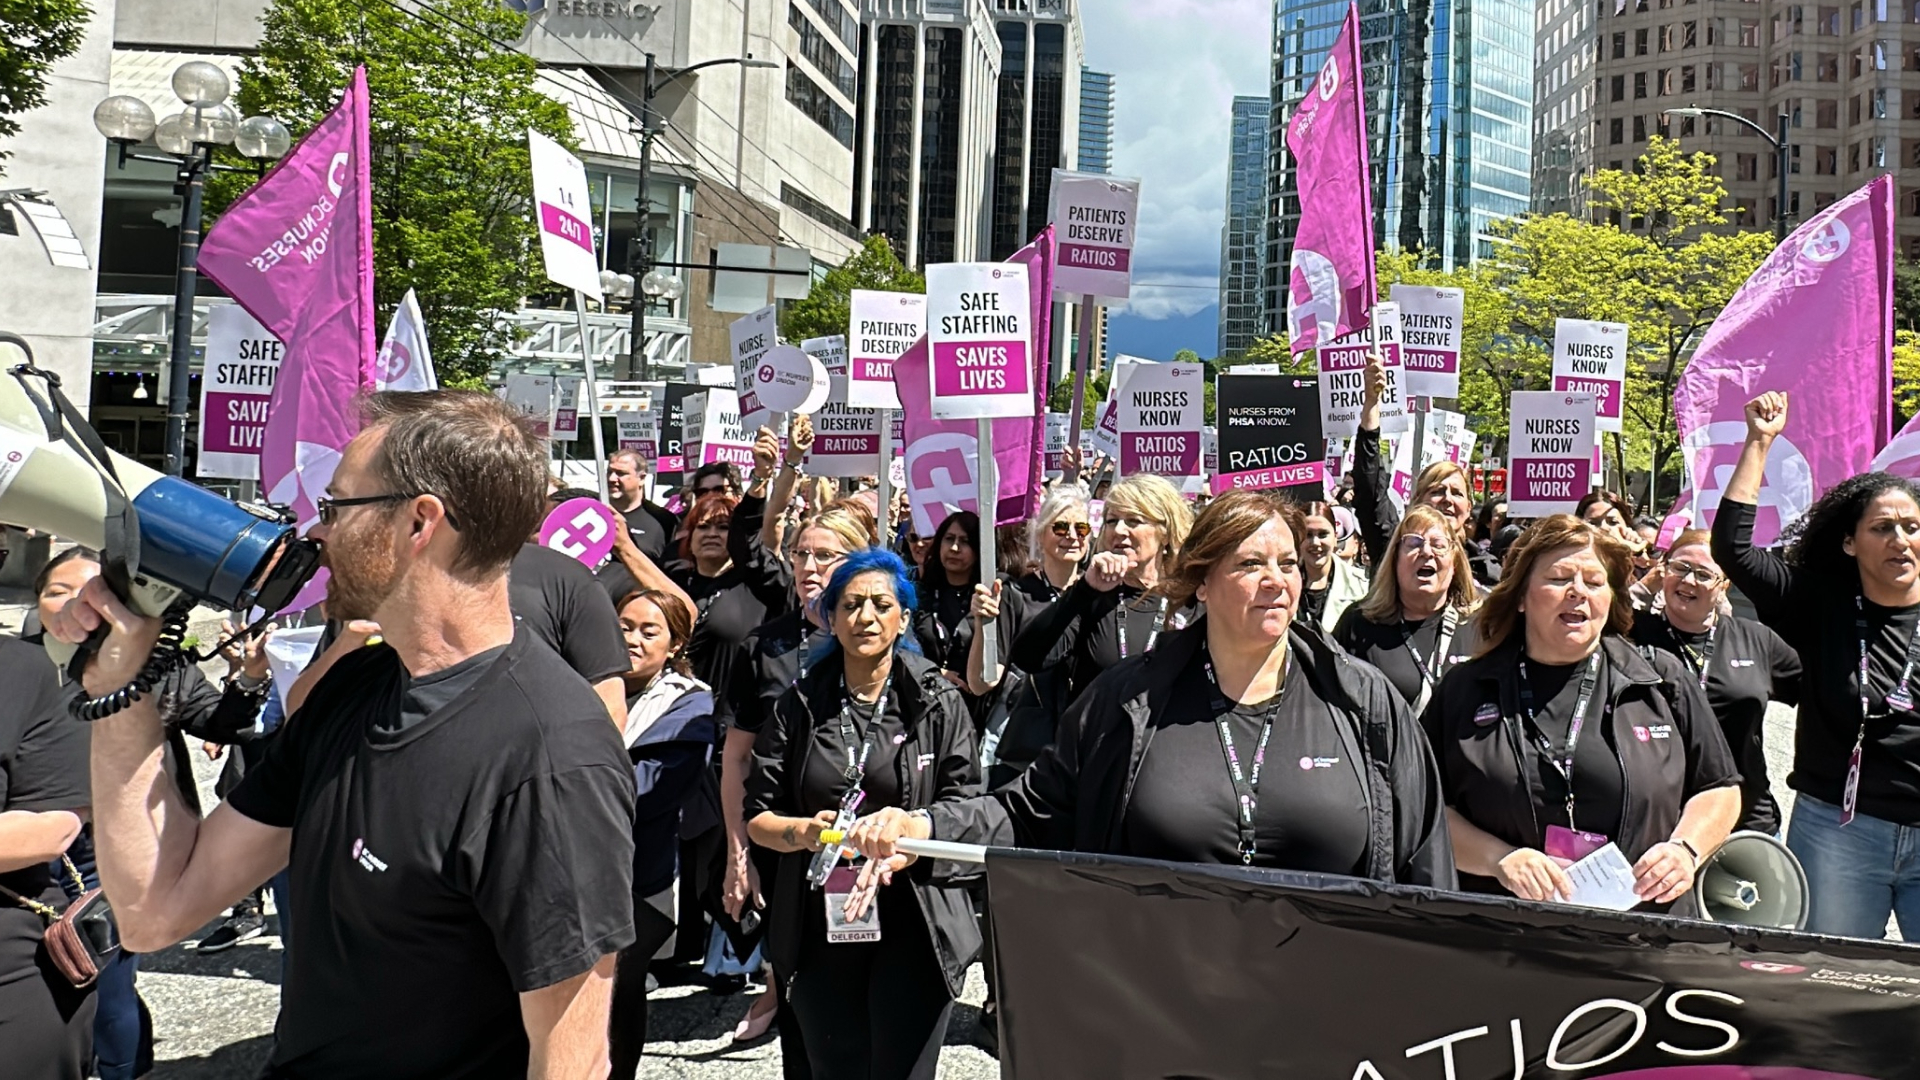 B.C. nurses rally in Vancouver for safer working conditions